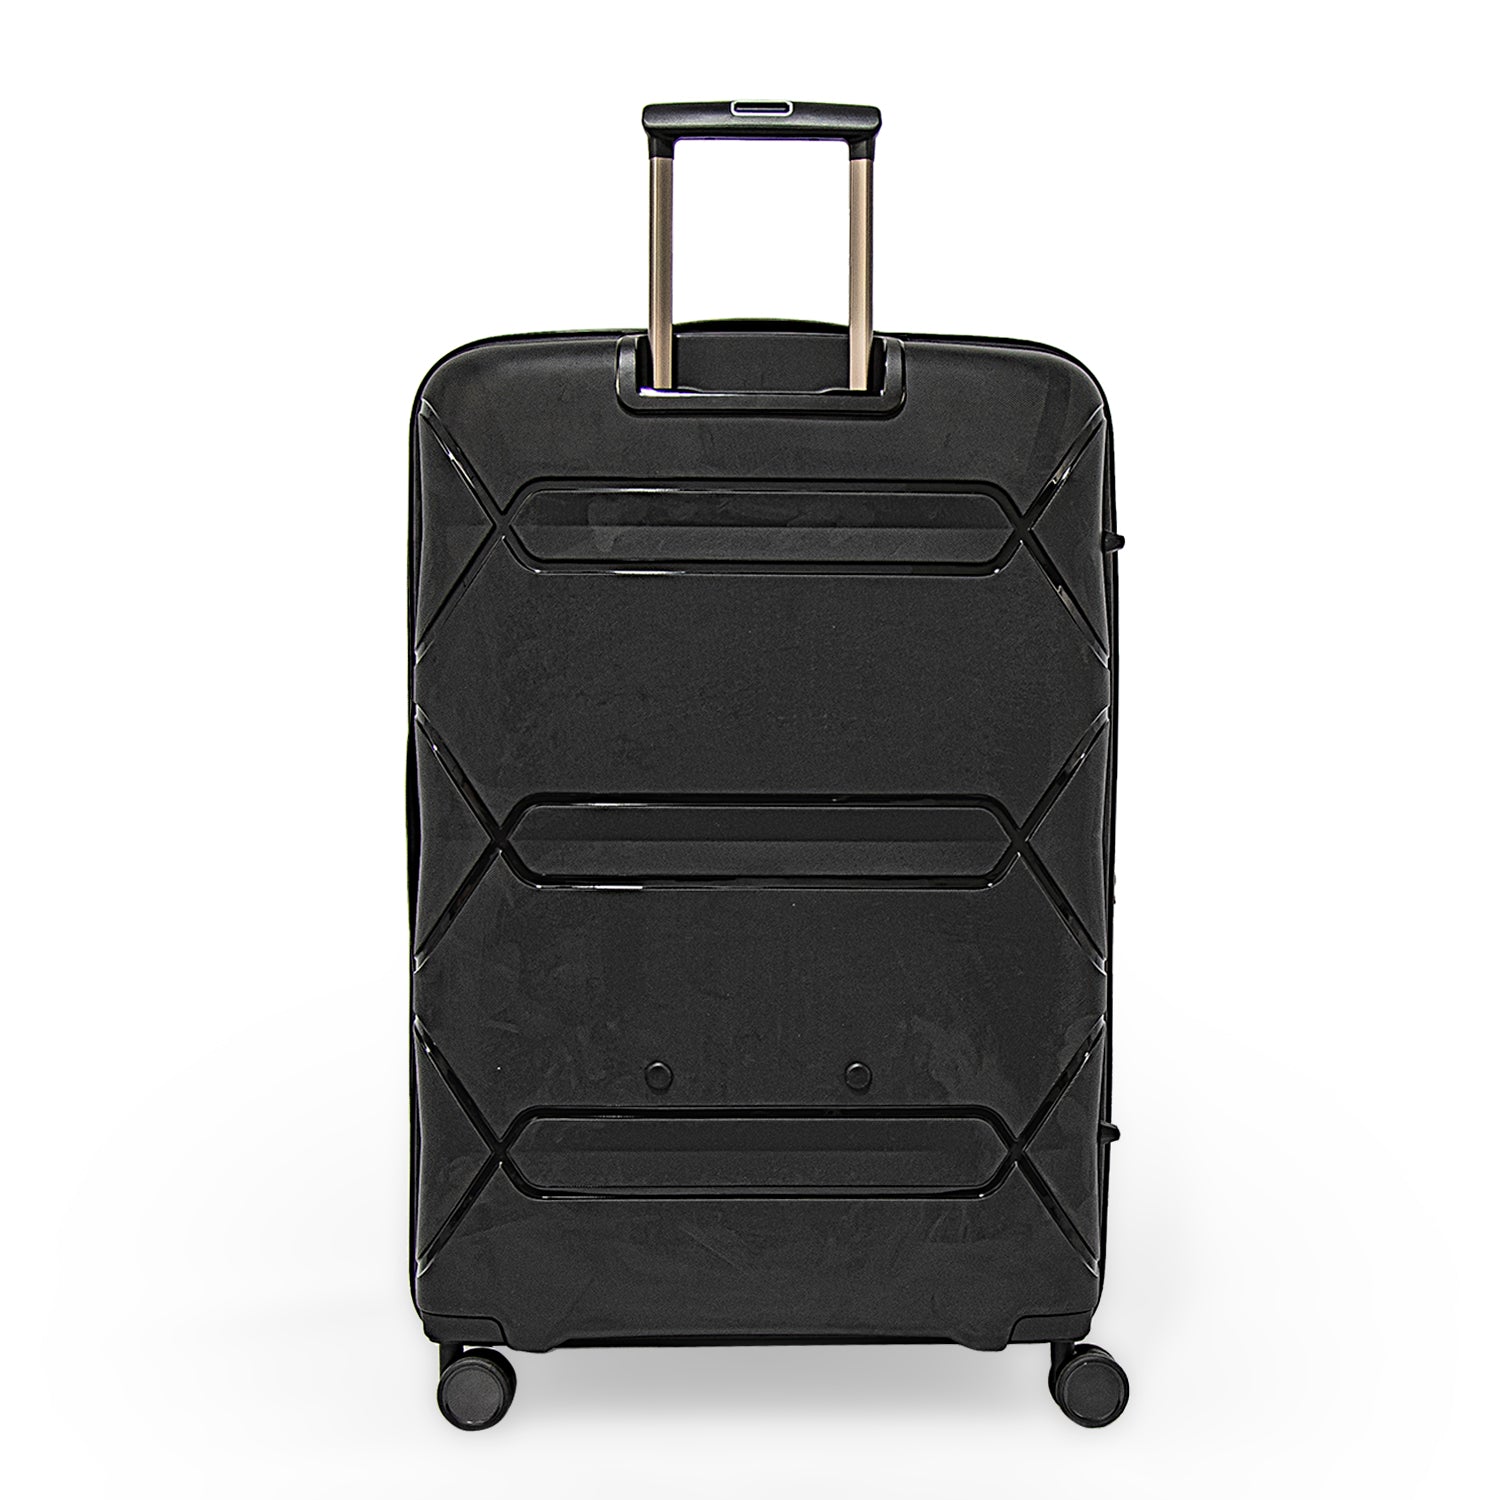 Pierre Cardin Trolley Strong Flexible Suitcases Set of 3 Black